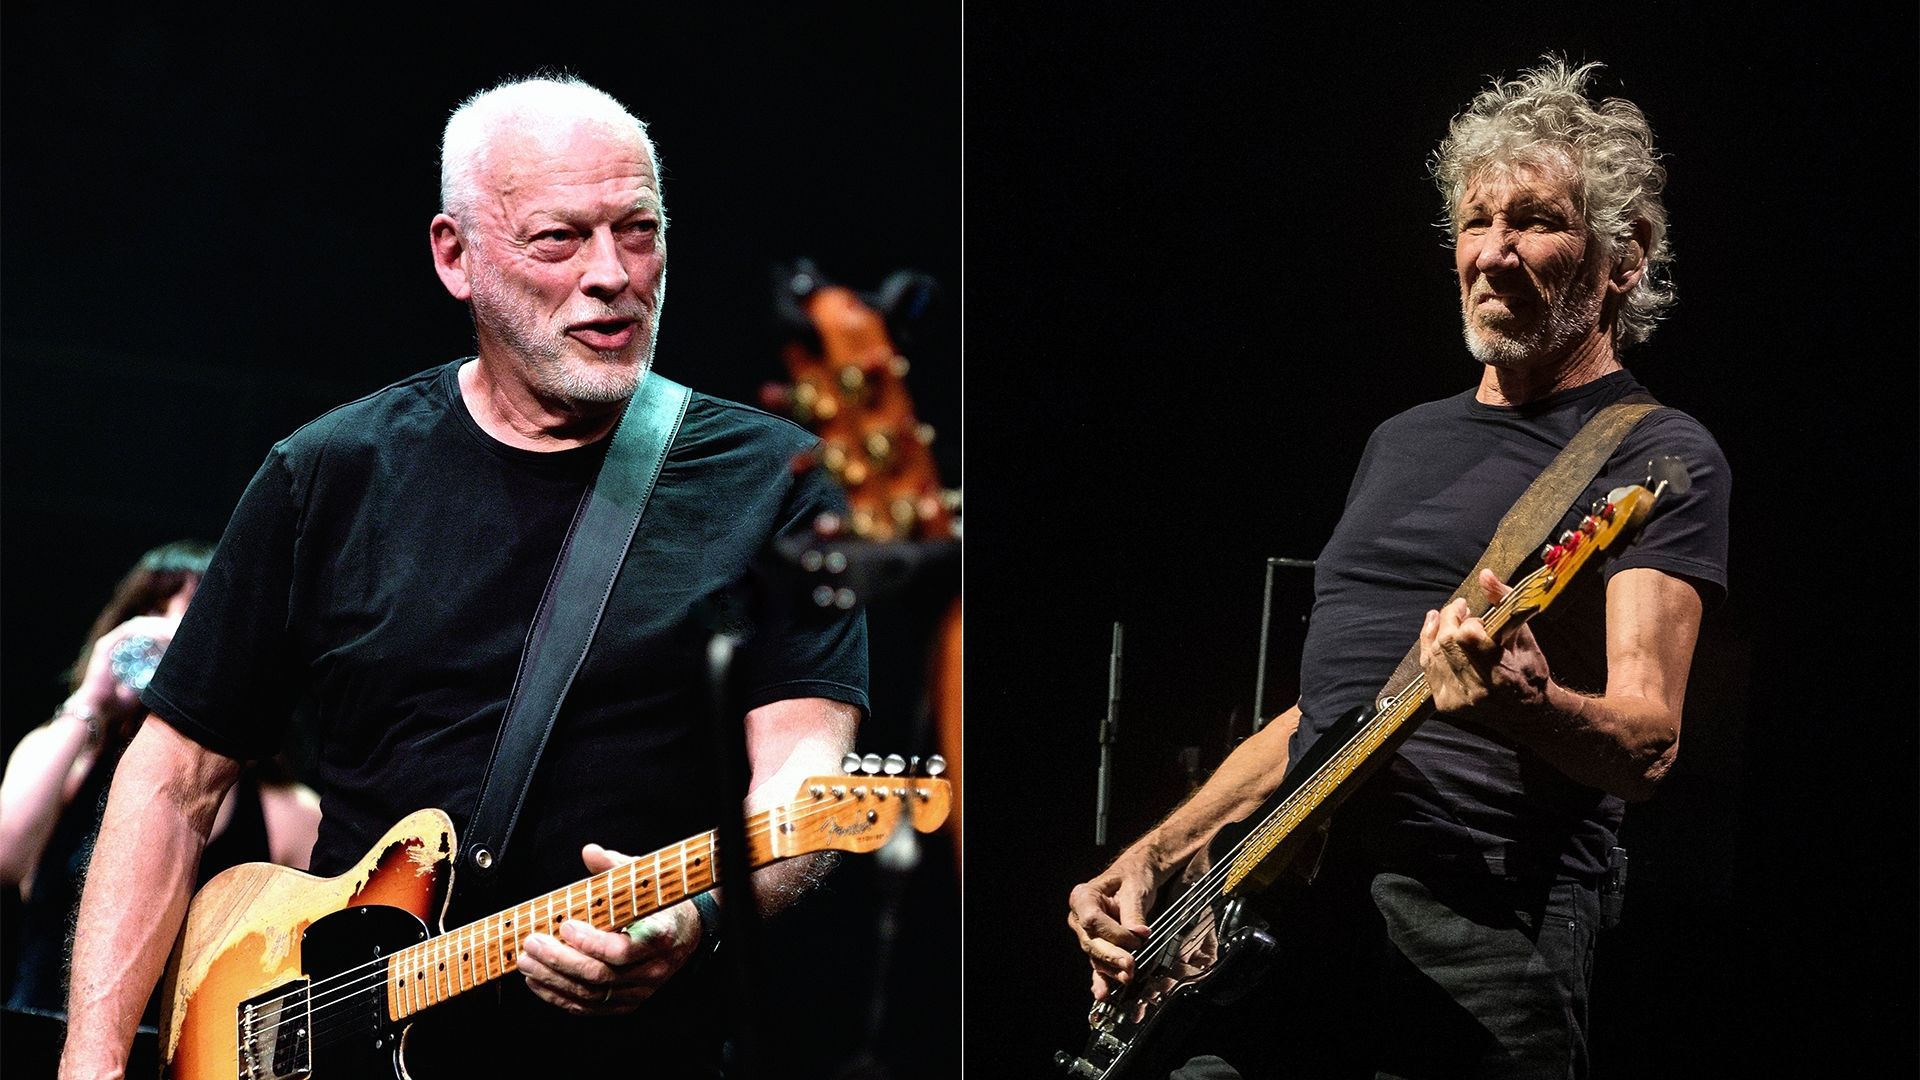 David Gilmour – Roger Waters